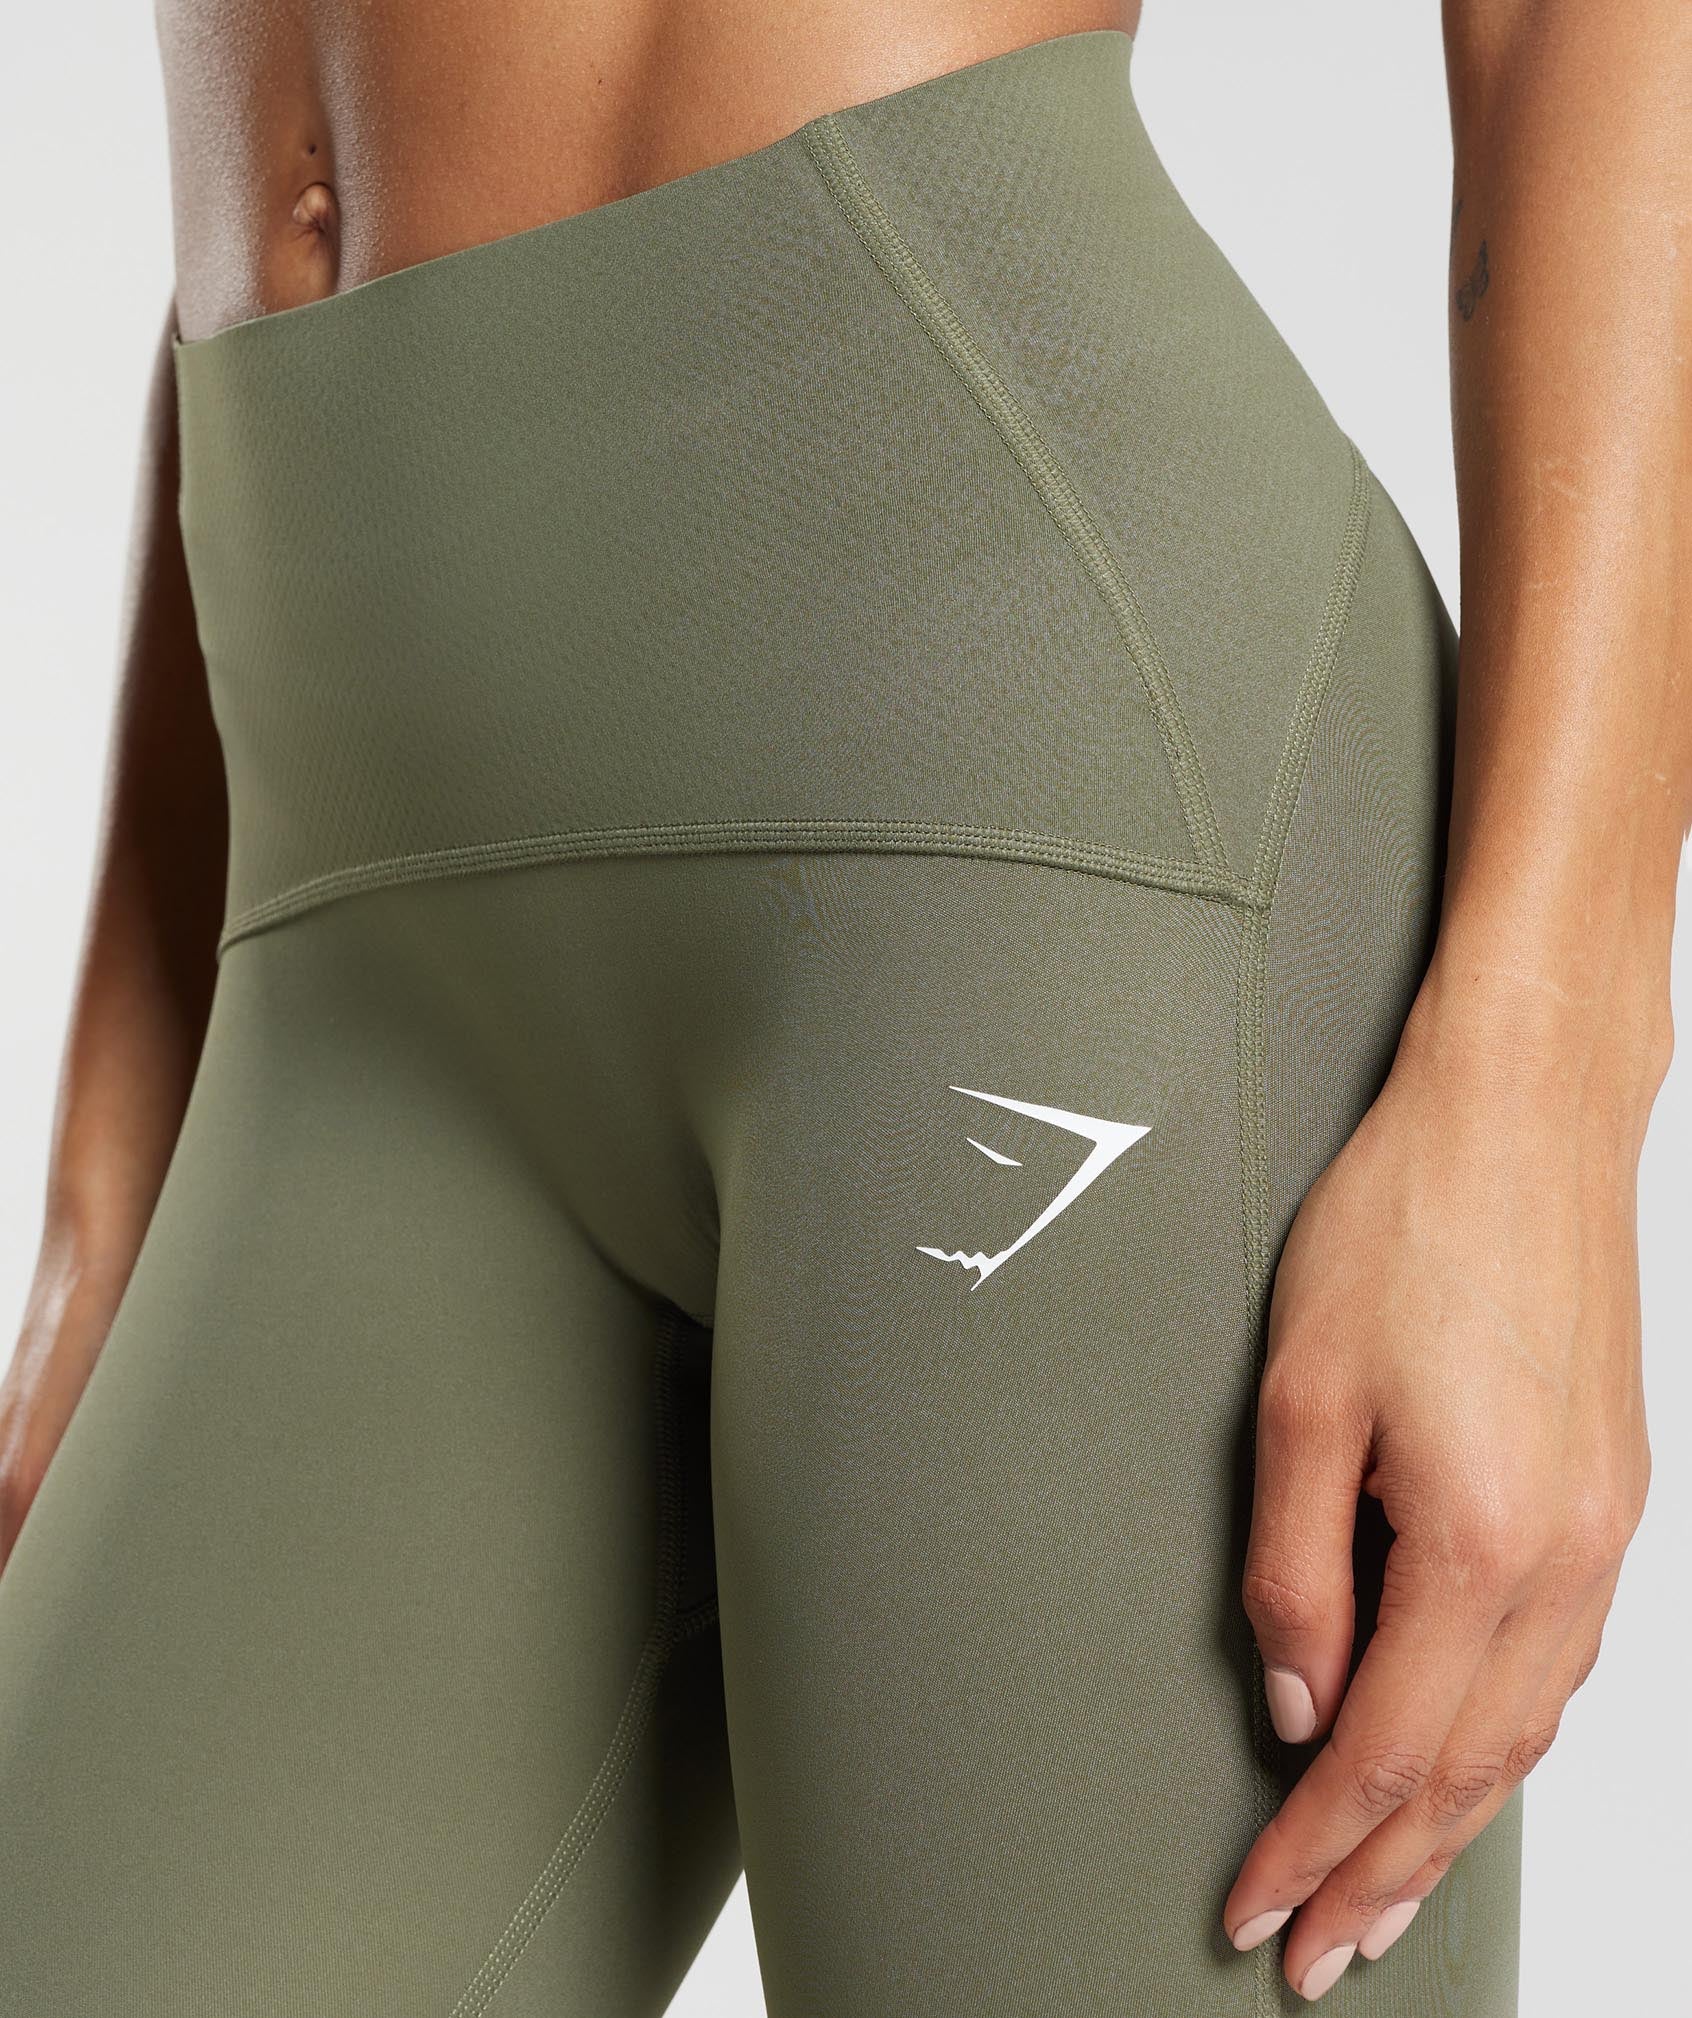 Waist Support Leggings in Dusty Olive - view 6